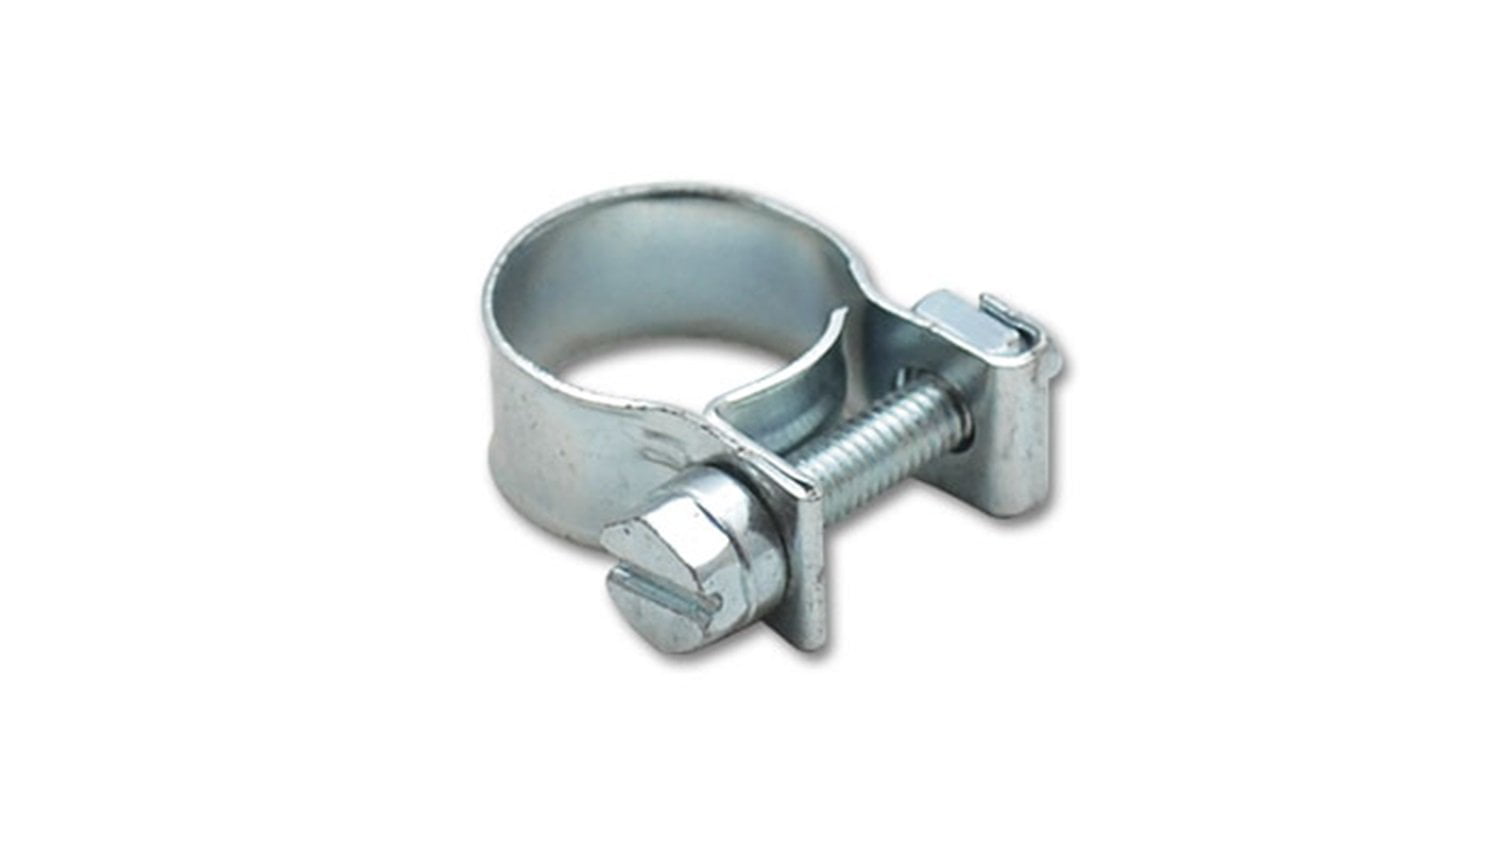 Vibrant 12154 Stainless Steel Worm Gear Clamp, Pack of 10 